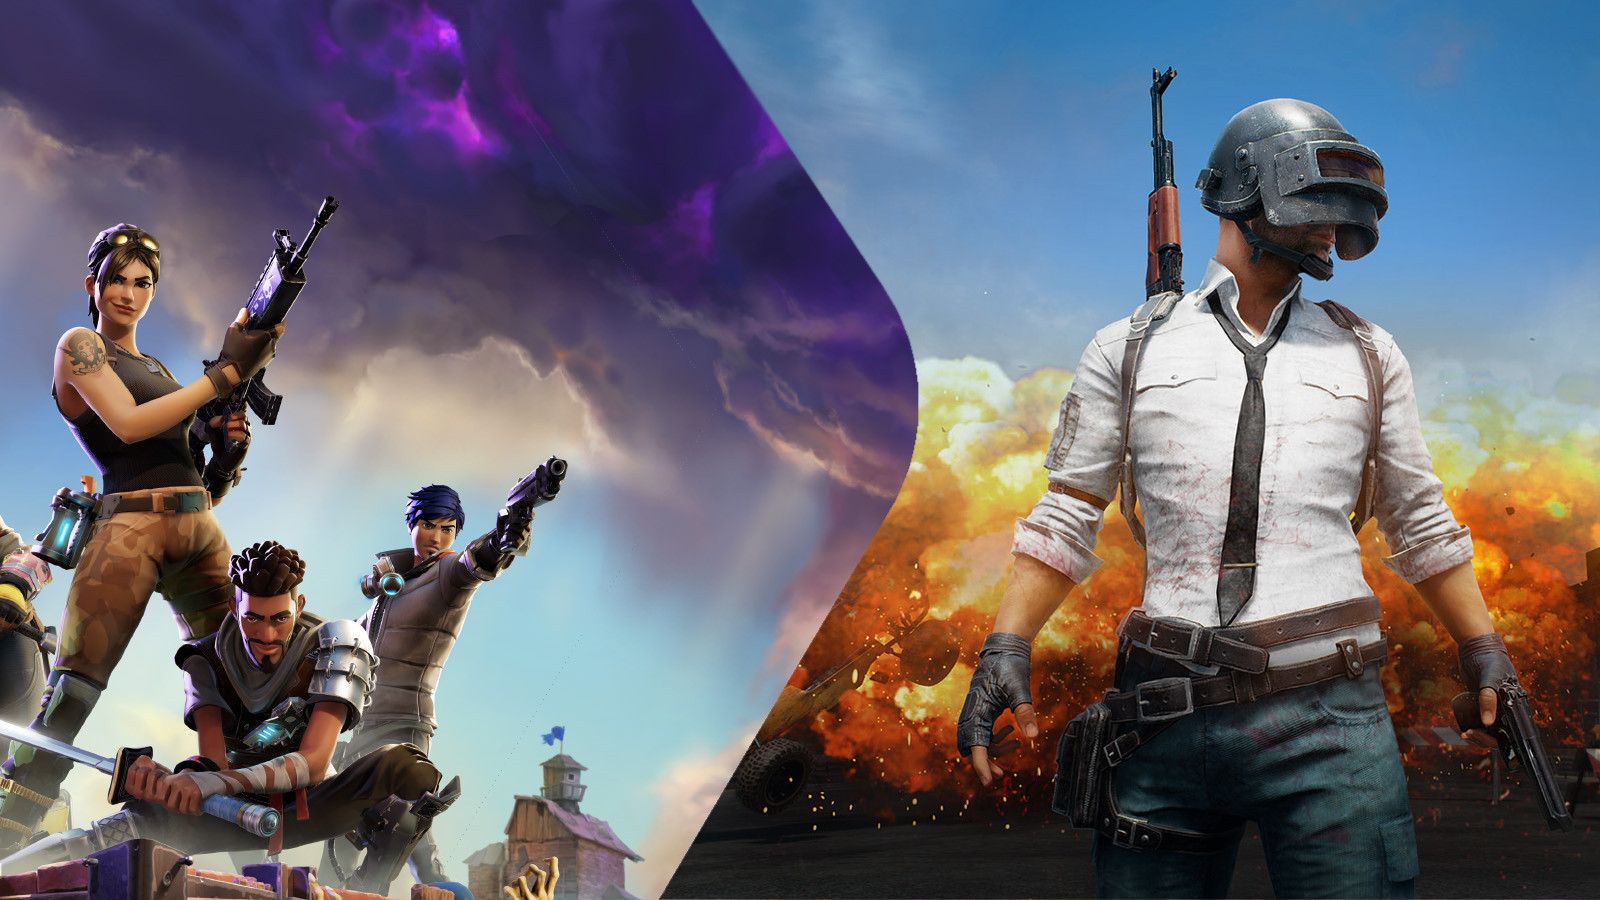 Fortnite more popular than PlayerUnknown's Battlegrounds